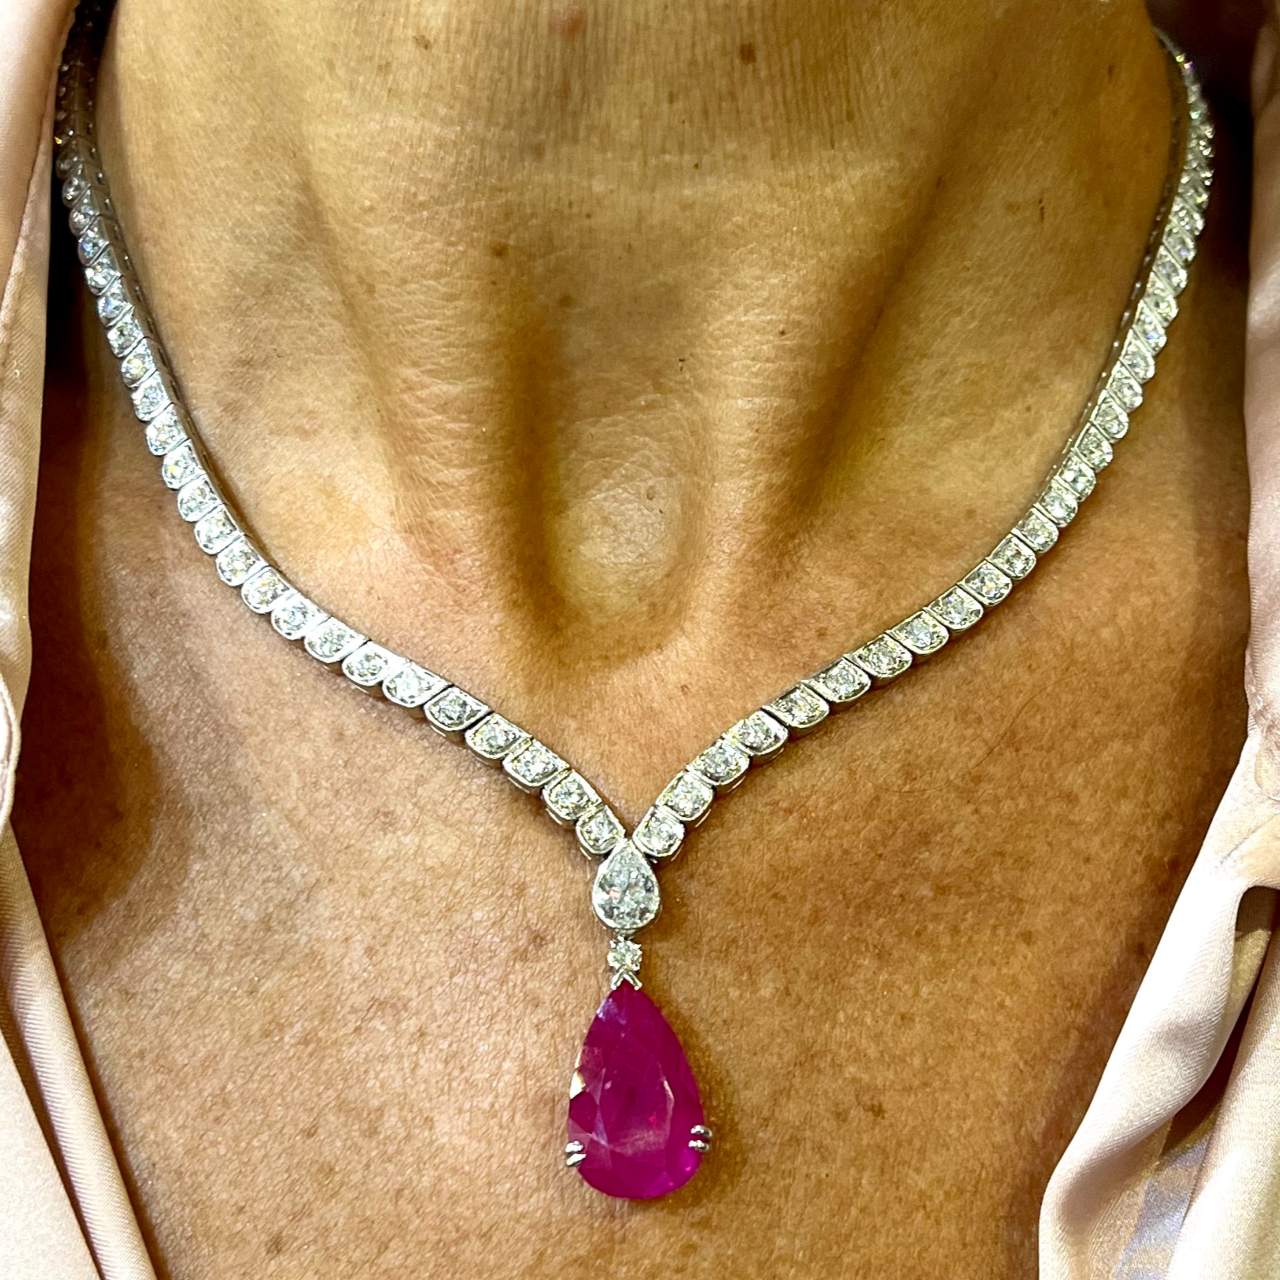 Pink and Purple Sapphire and Diamond Necklace